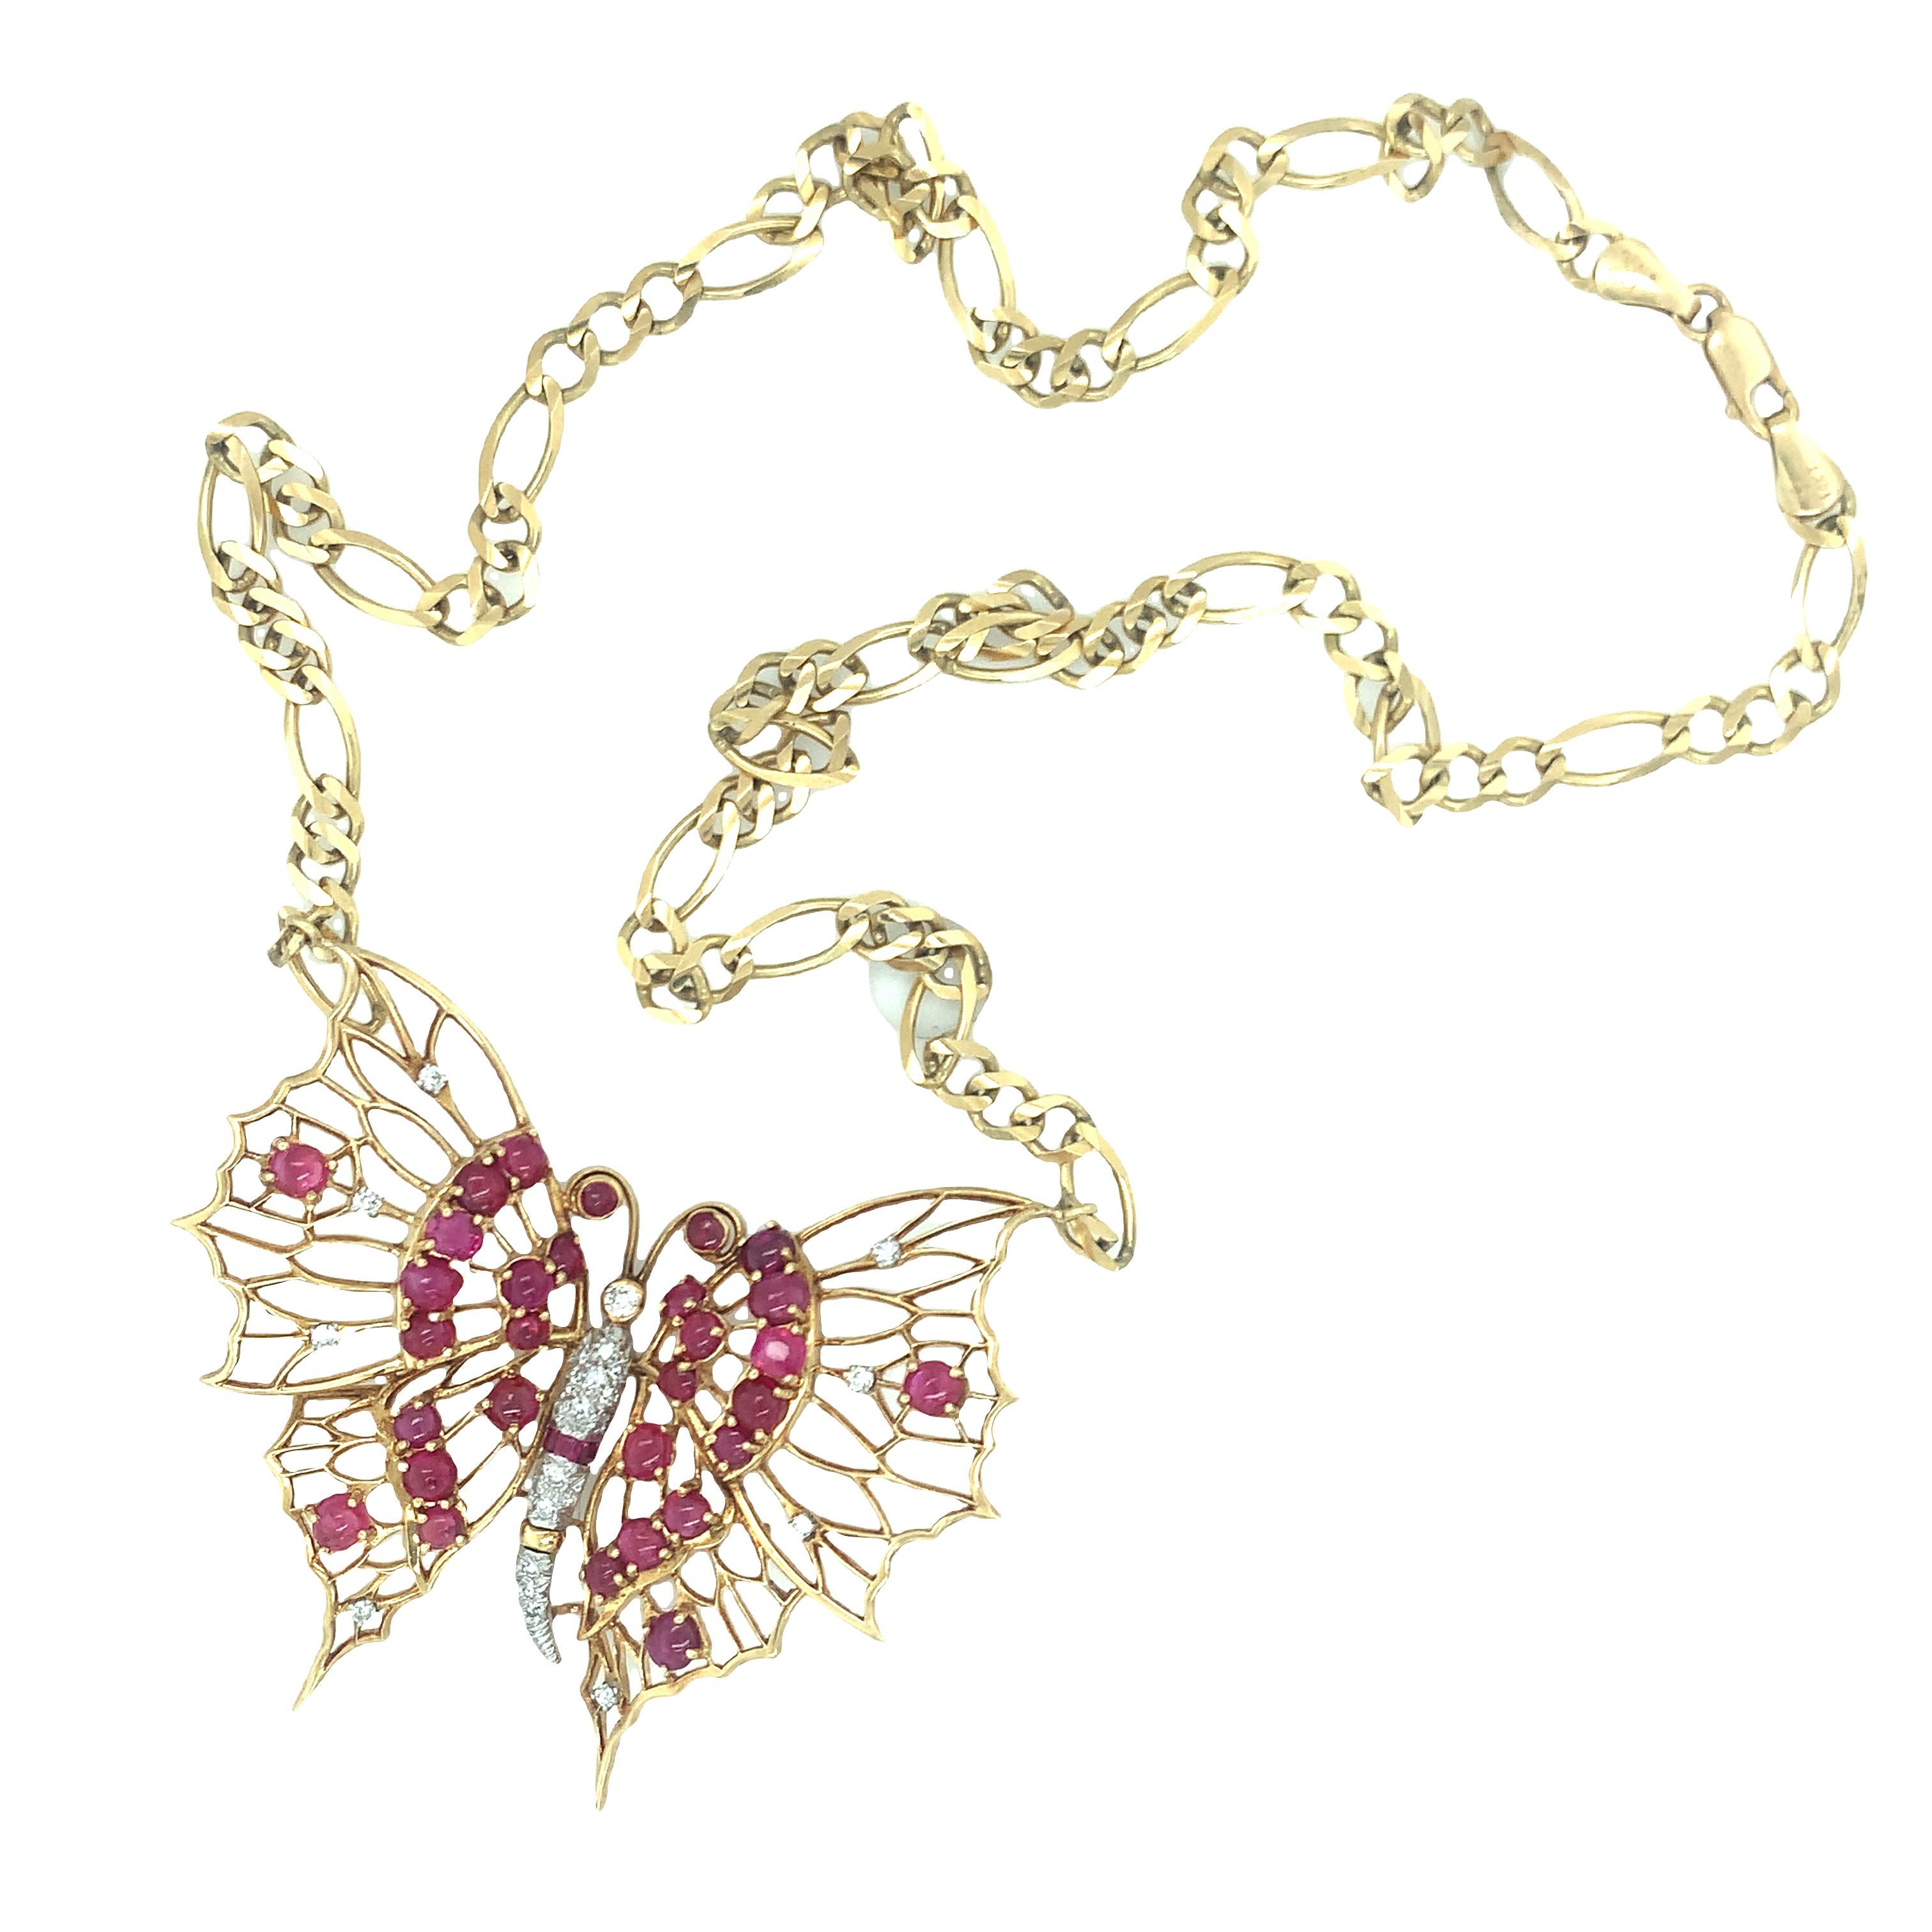 One Retro ruby and diamond butterfly motif 18K yellow gold pendant featuring 32 round cabochon and square cut rubies totaling 9 ct. Accented by 24 single round cut and old European cut diamonds totaling 0.75 ct. with a G-H color and SI-1 clarity.